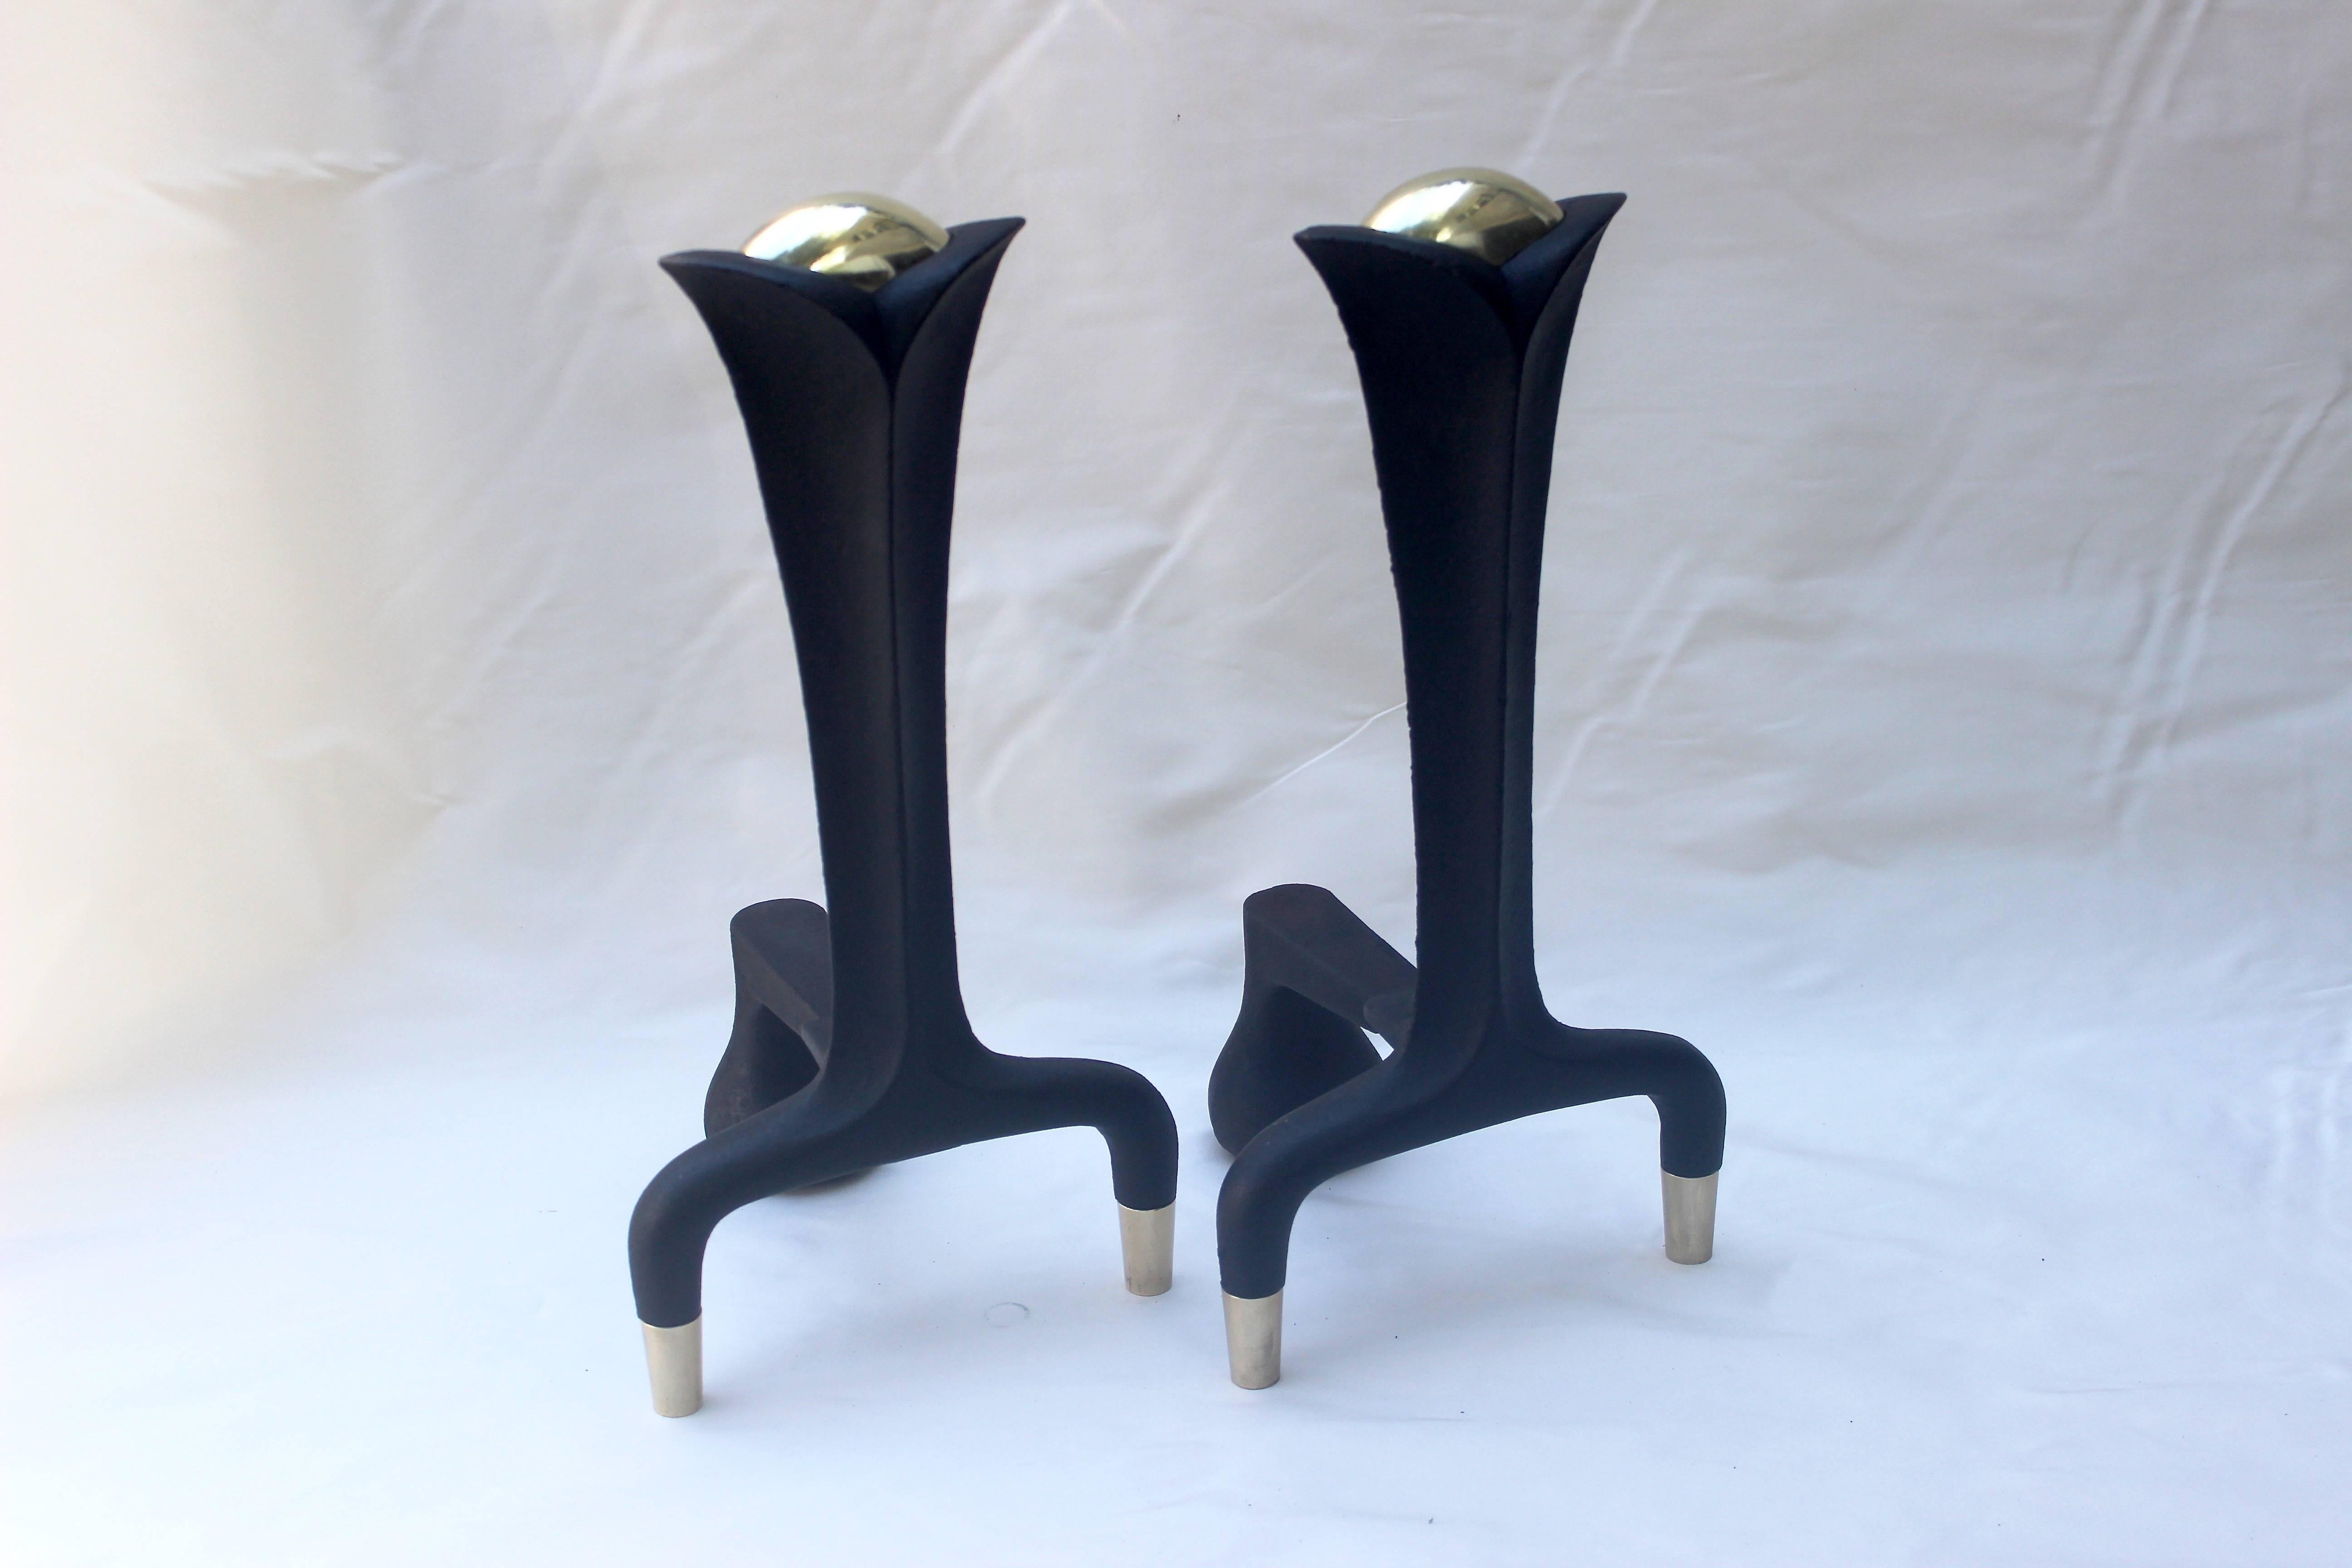 Pair of Donald Deskey andirons made of cast iron and brass.